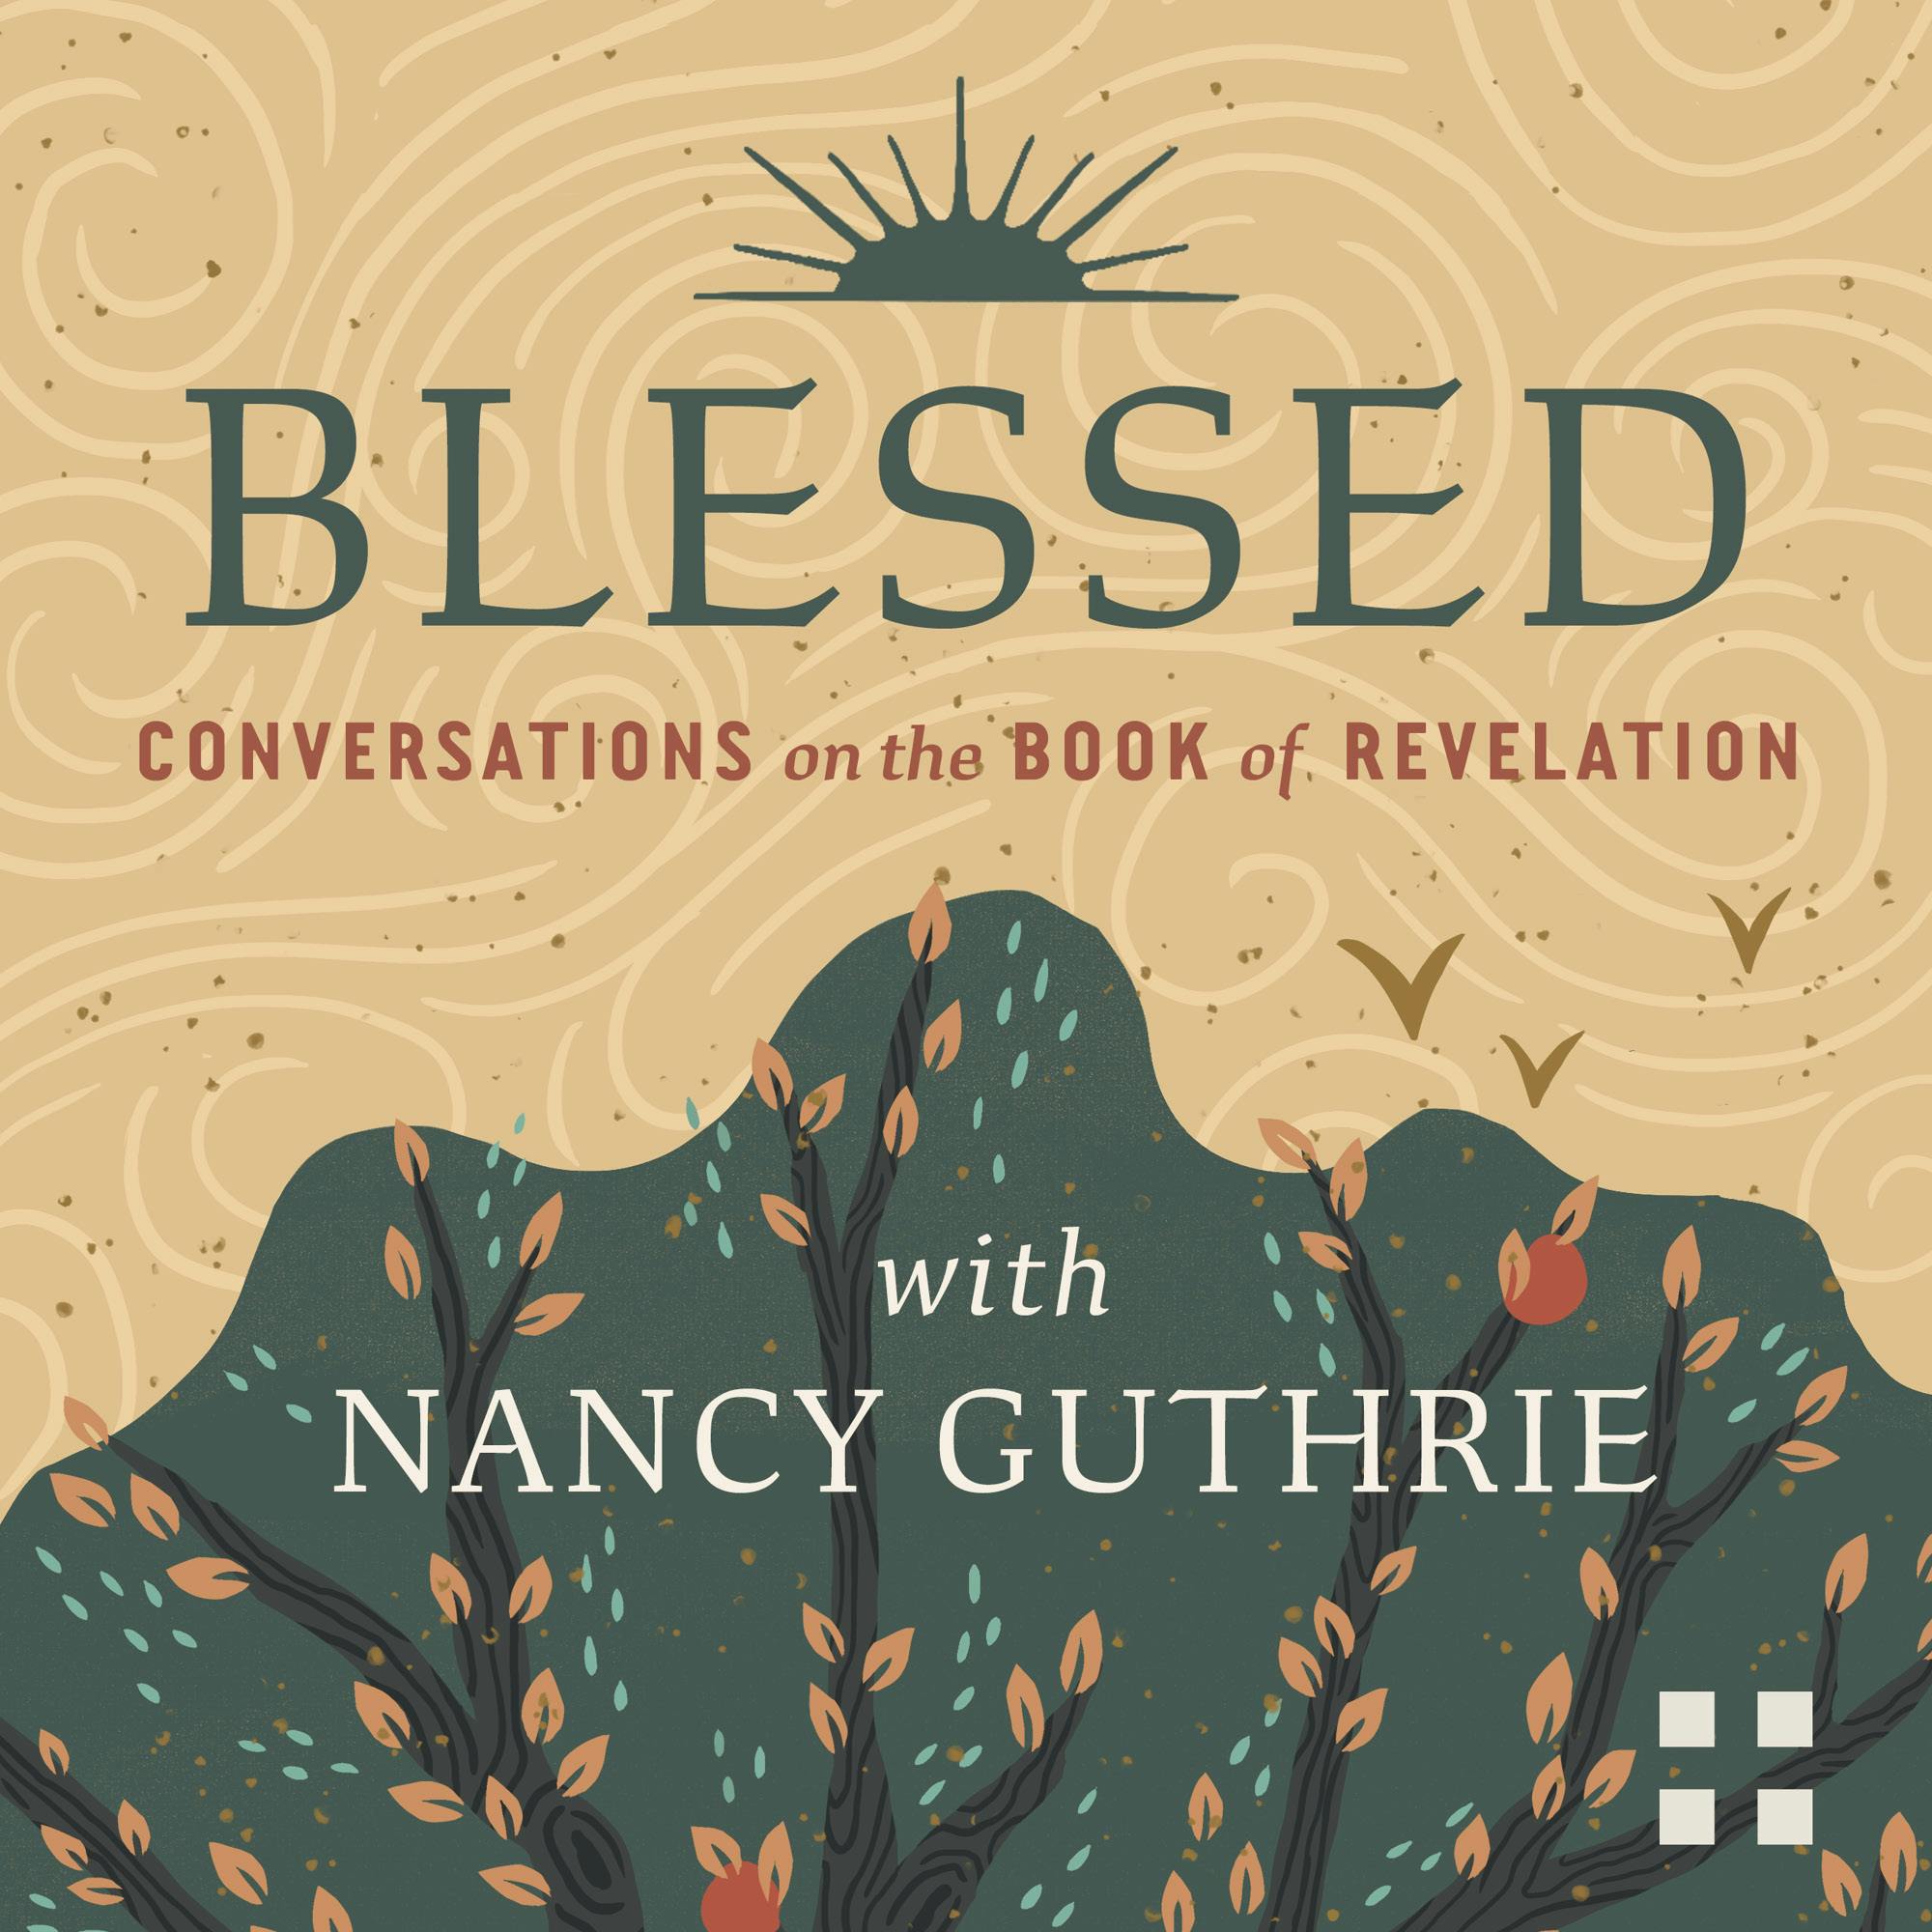 Preview: Nancy Guthrie's New Podcast on the Book of Revelation